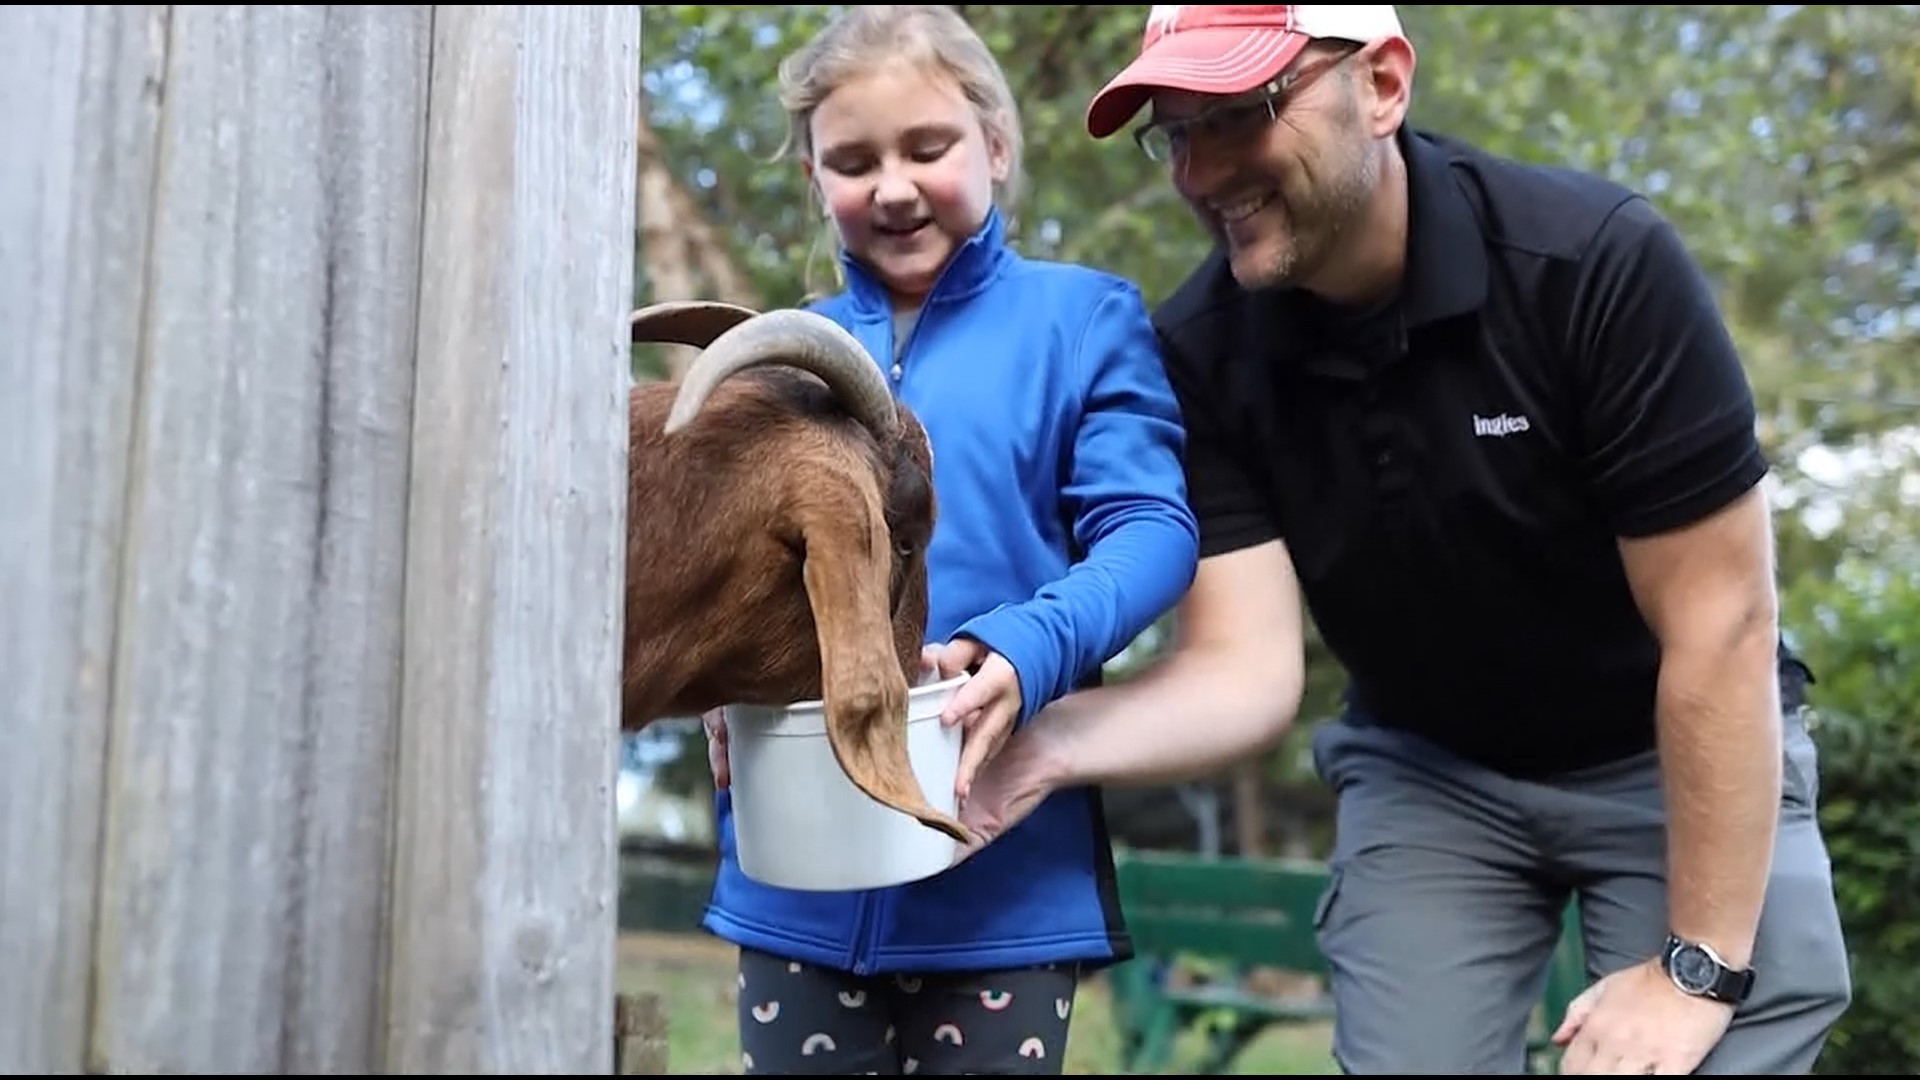 Briarwood Ranch Safari Park features animals from around the world. Go inside with Ingles Markets and explore with the whole family!